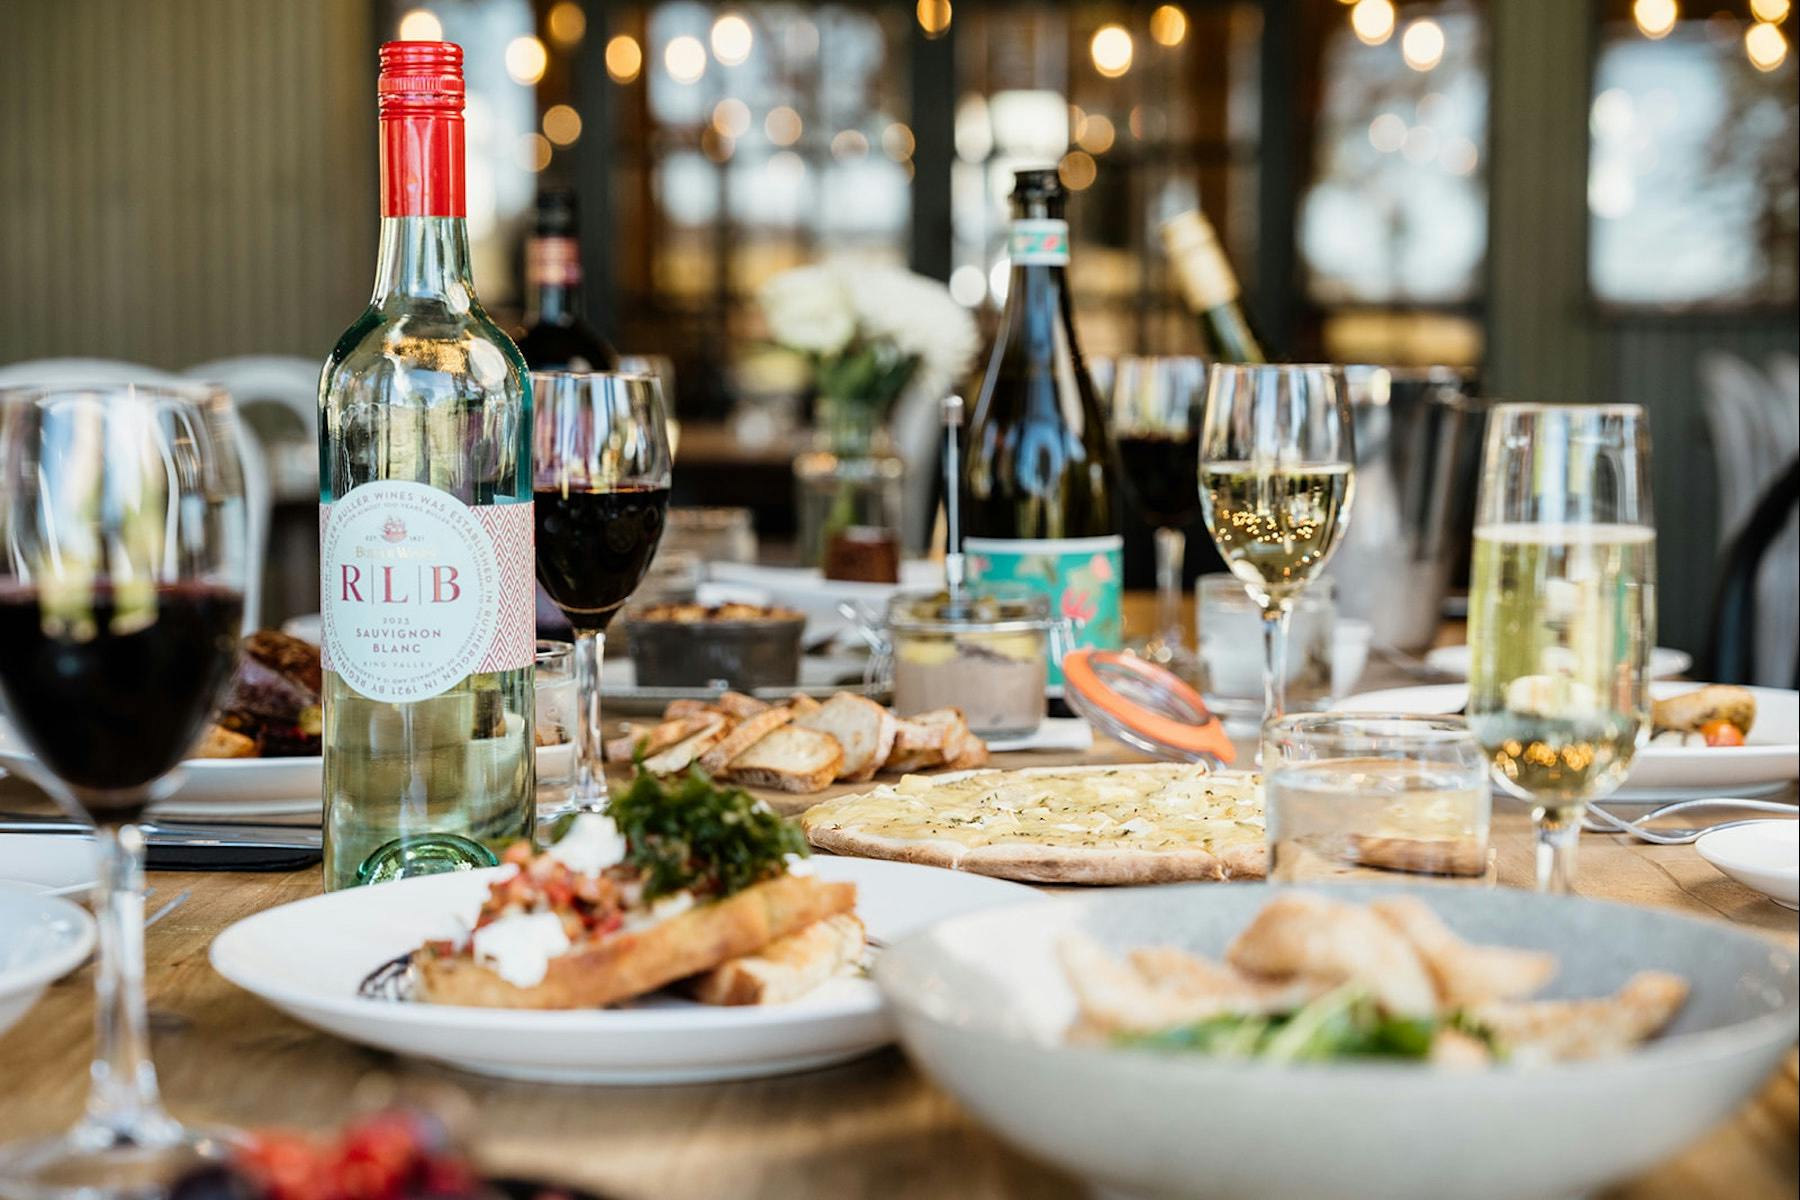 A selection of food and wine on a restaurant table.